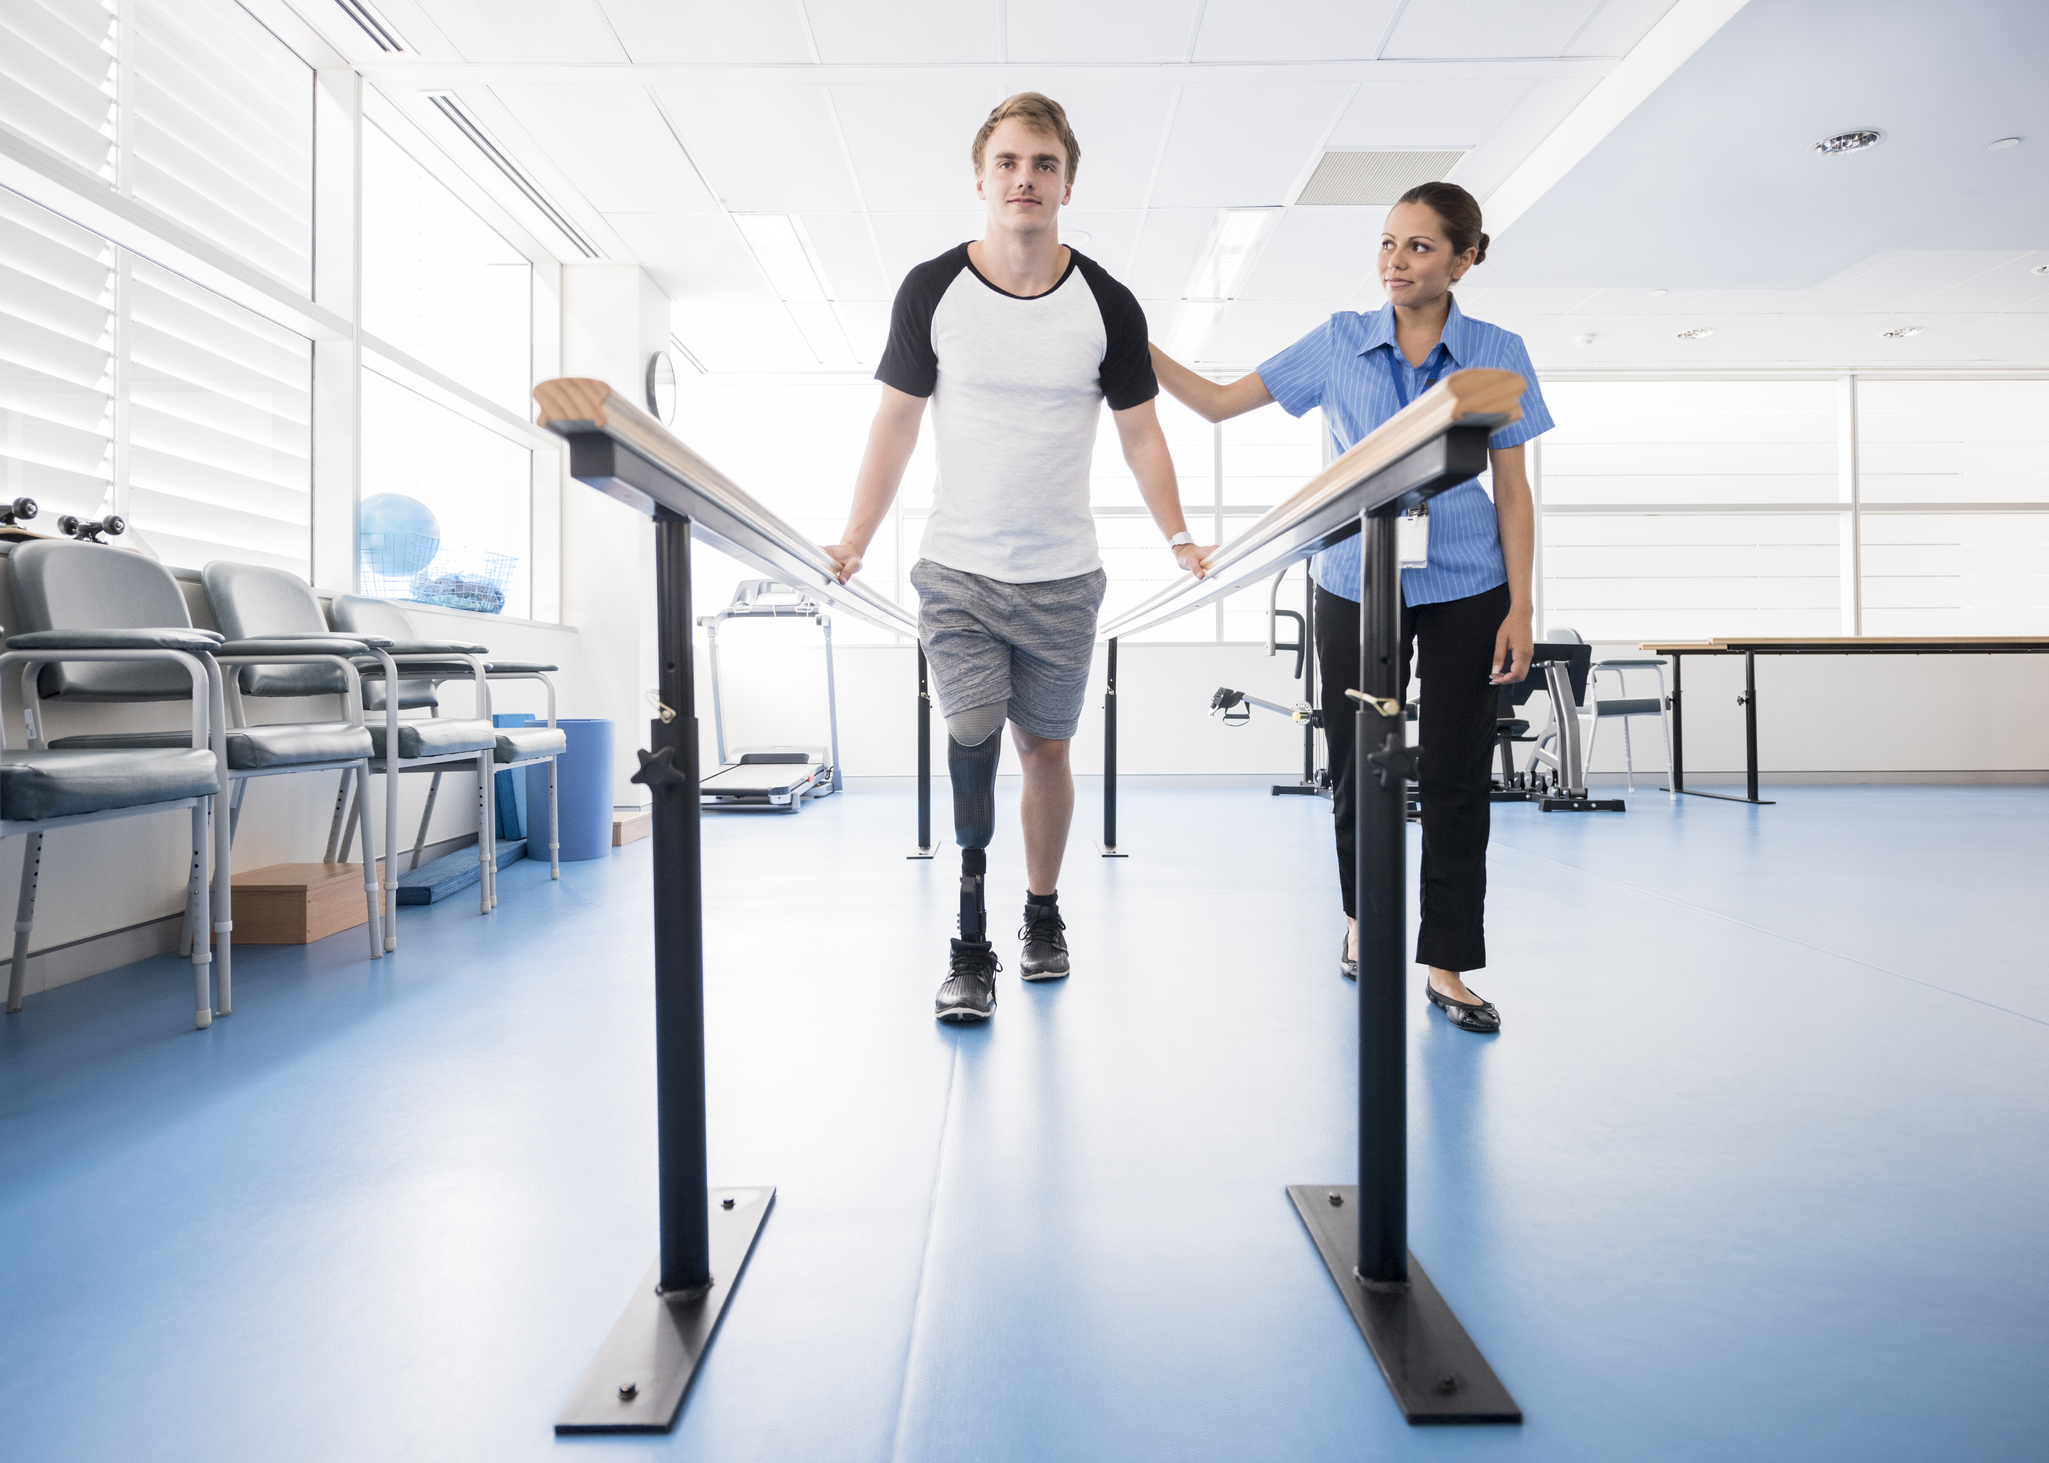 Man with prosthetic leg using parallel bars with physyiotherapist